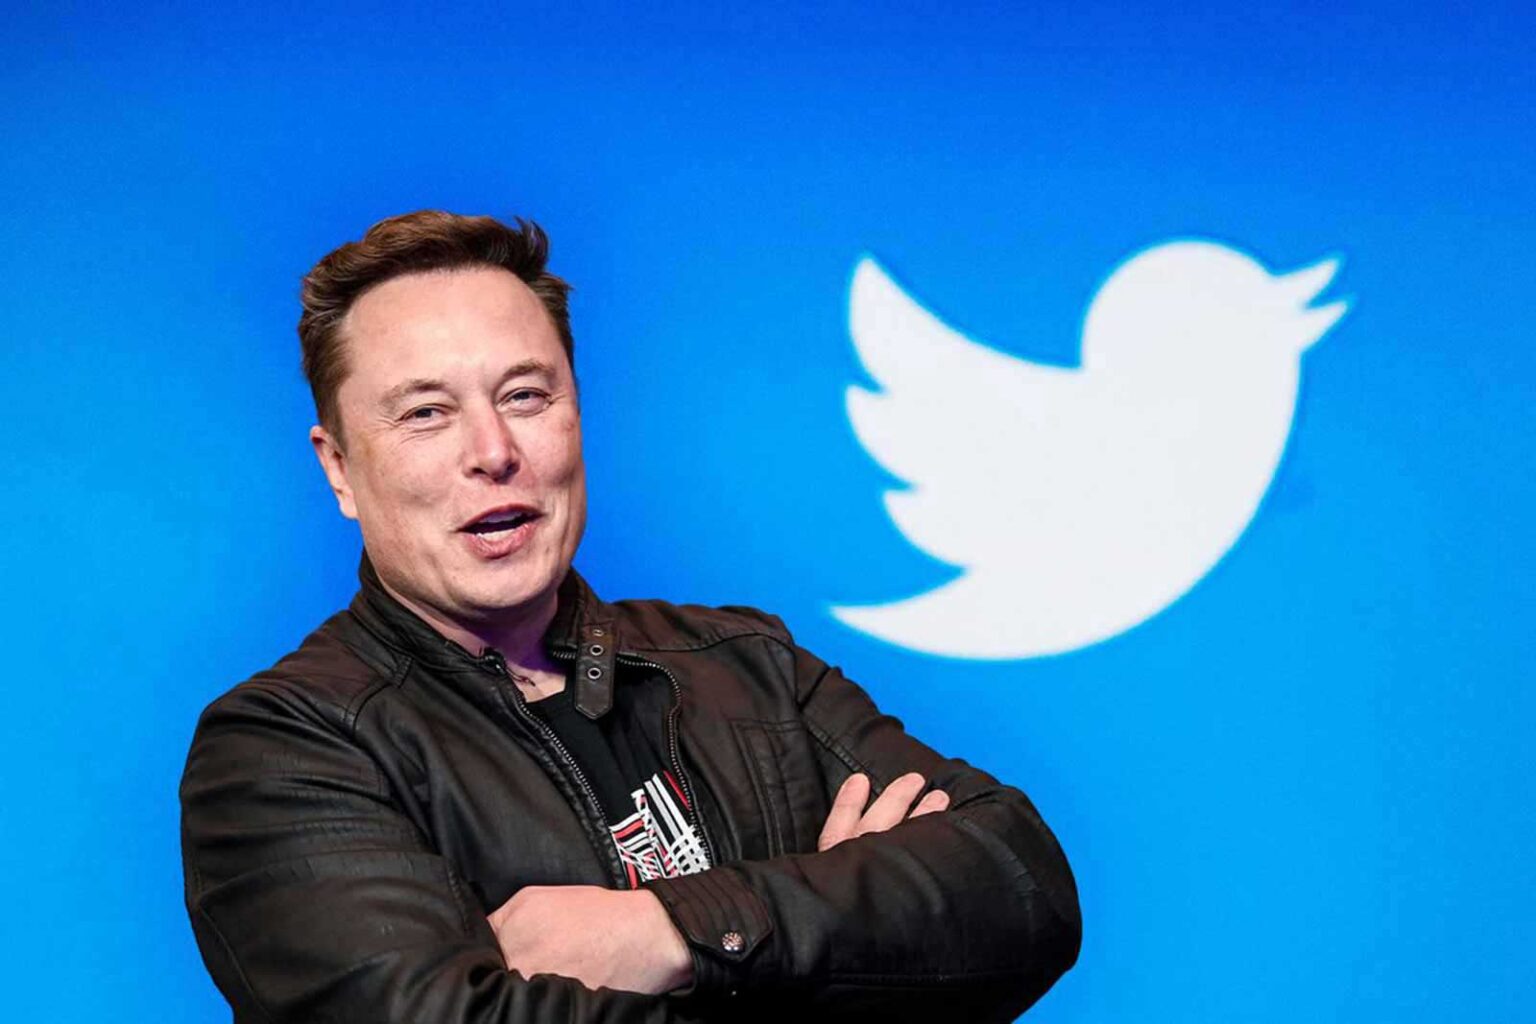 elon-musks-acquisition-of-twitter-is-nearing-completion-1536x1024.jpg